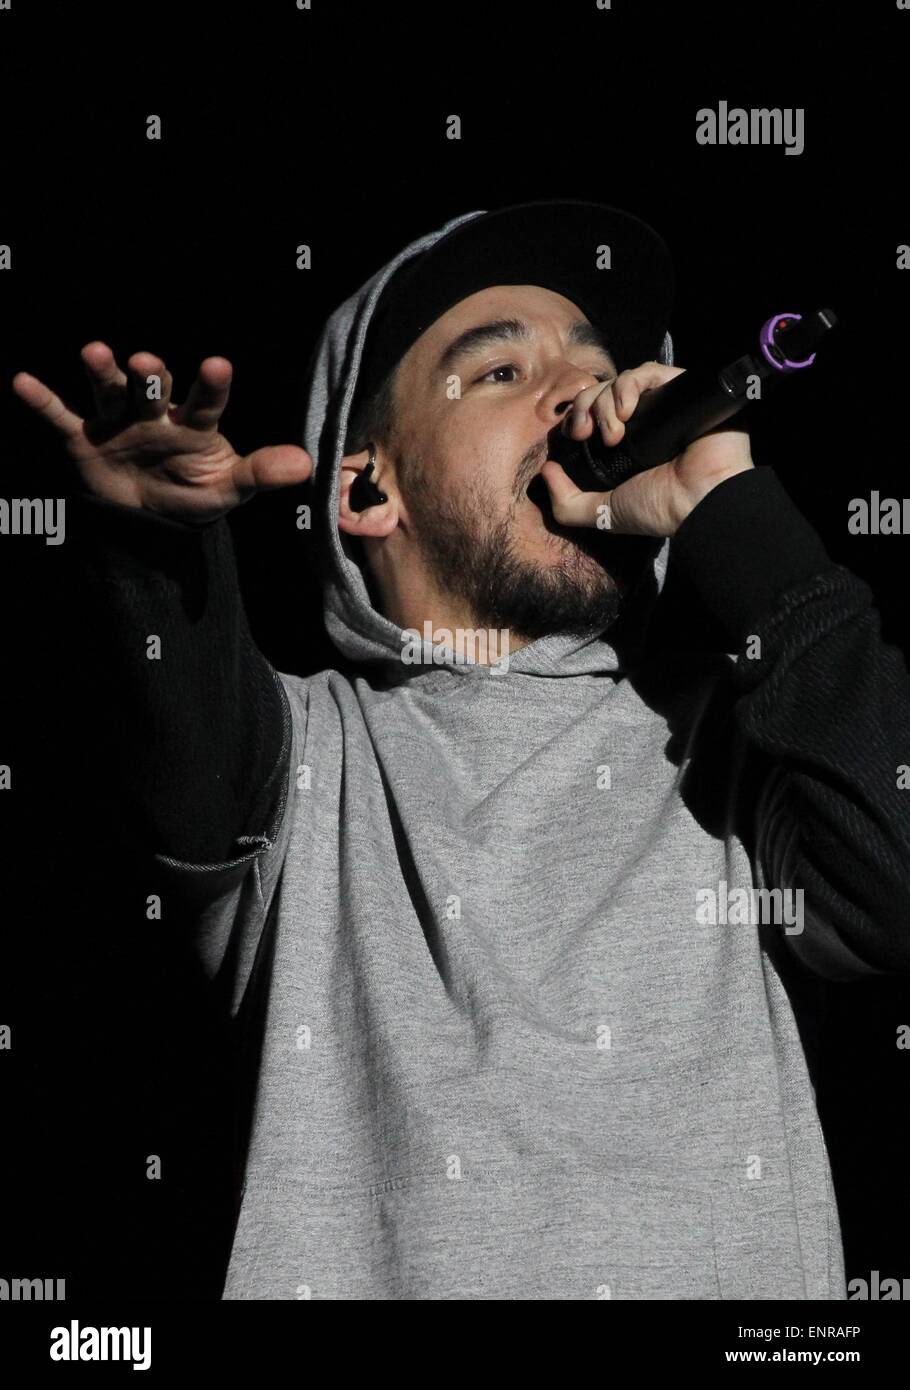 Las Vegas, NV, USA. 9th May, 2015. Mike Shinoda of Linkin Park on stage for Rock in Rio USA 2015 - SAT, City of Rock, Las Vegas, NV May 9, 2015. Credit:  James Atoa/Everett Collection/Alamy Live News Stock Photo